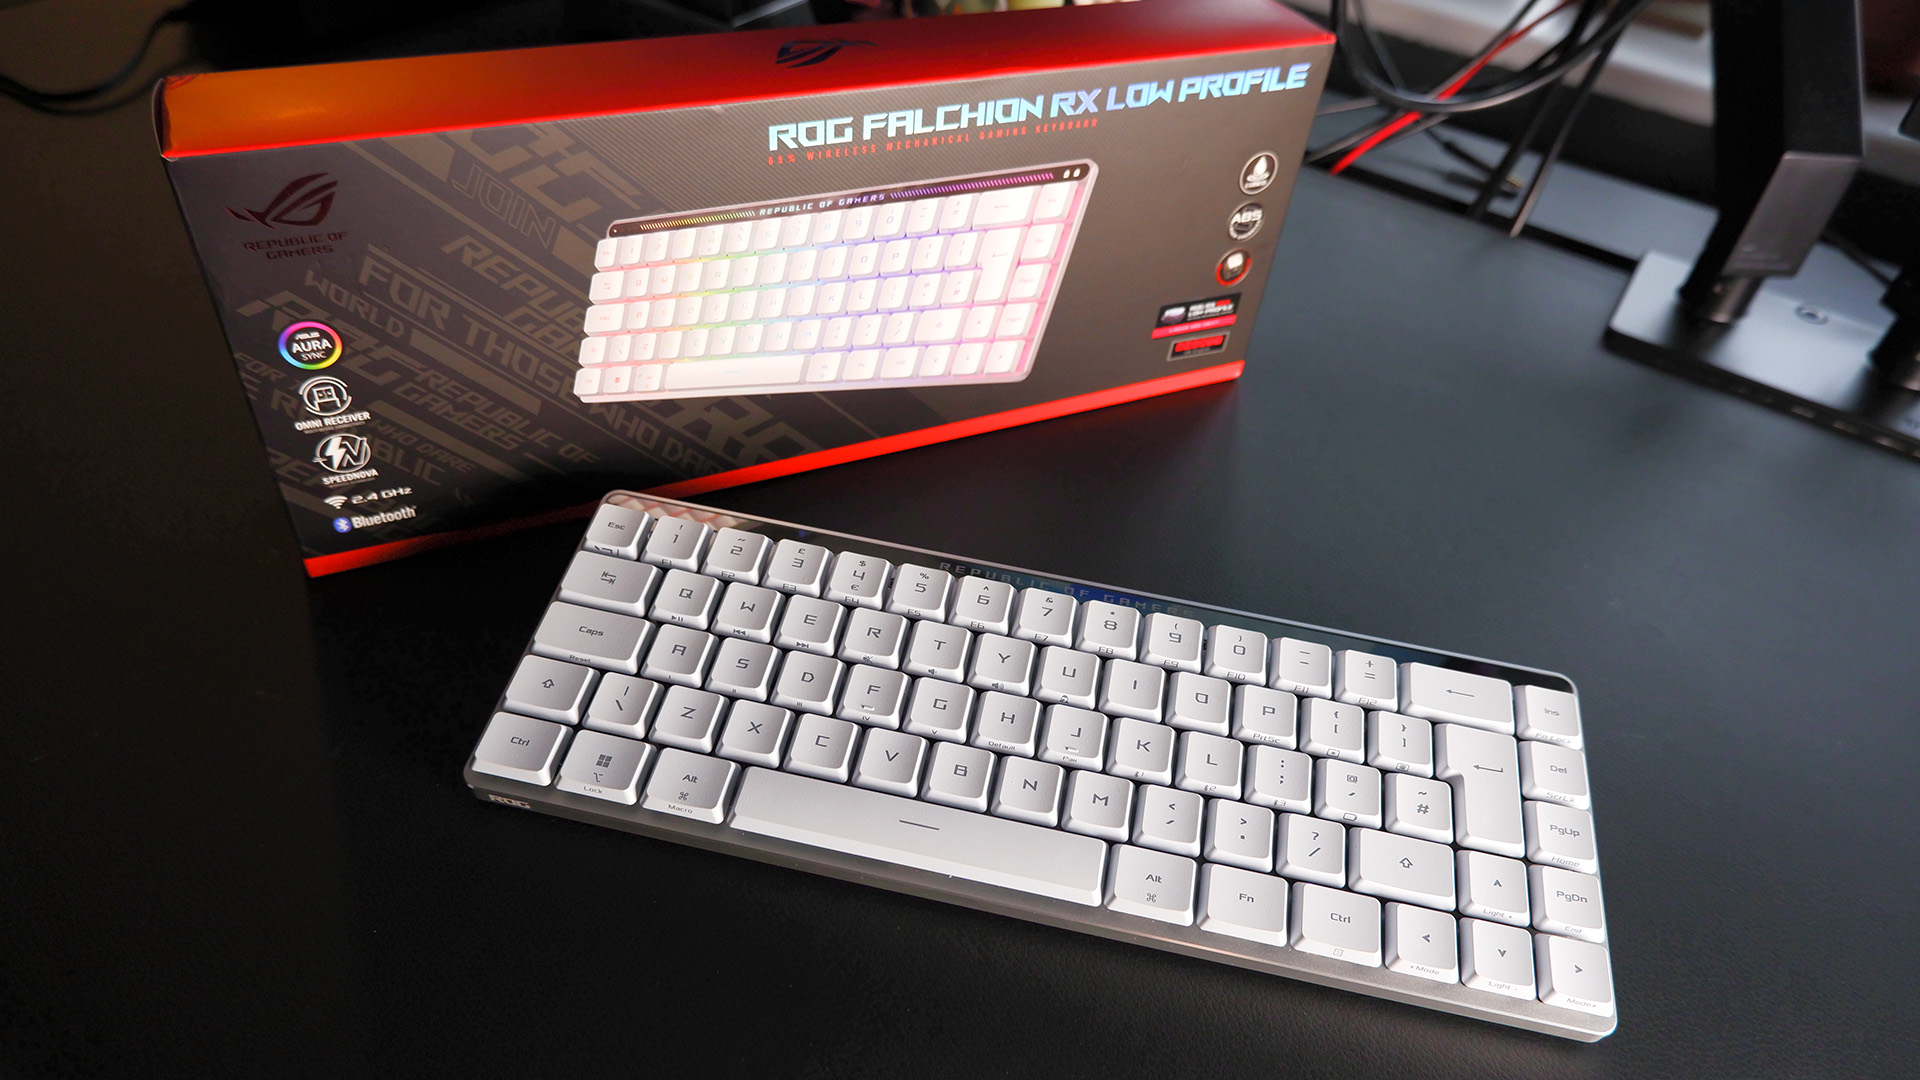 The ROG Falchion RX gaming keyboard in white set up on a desk.